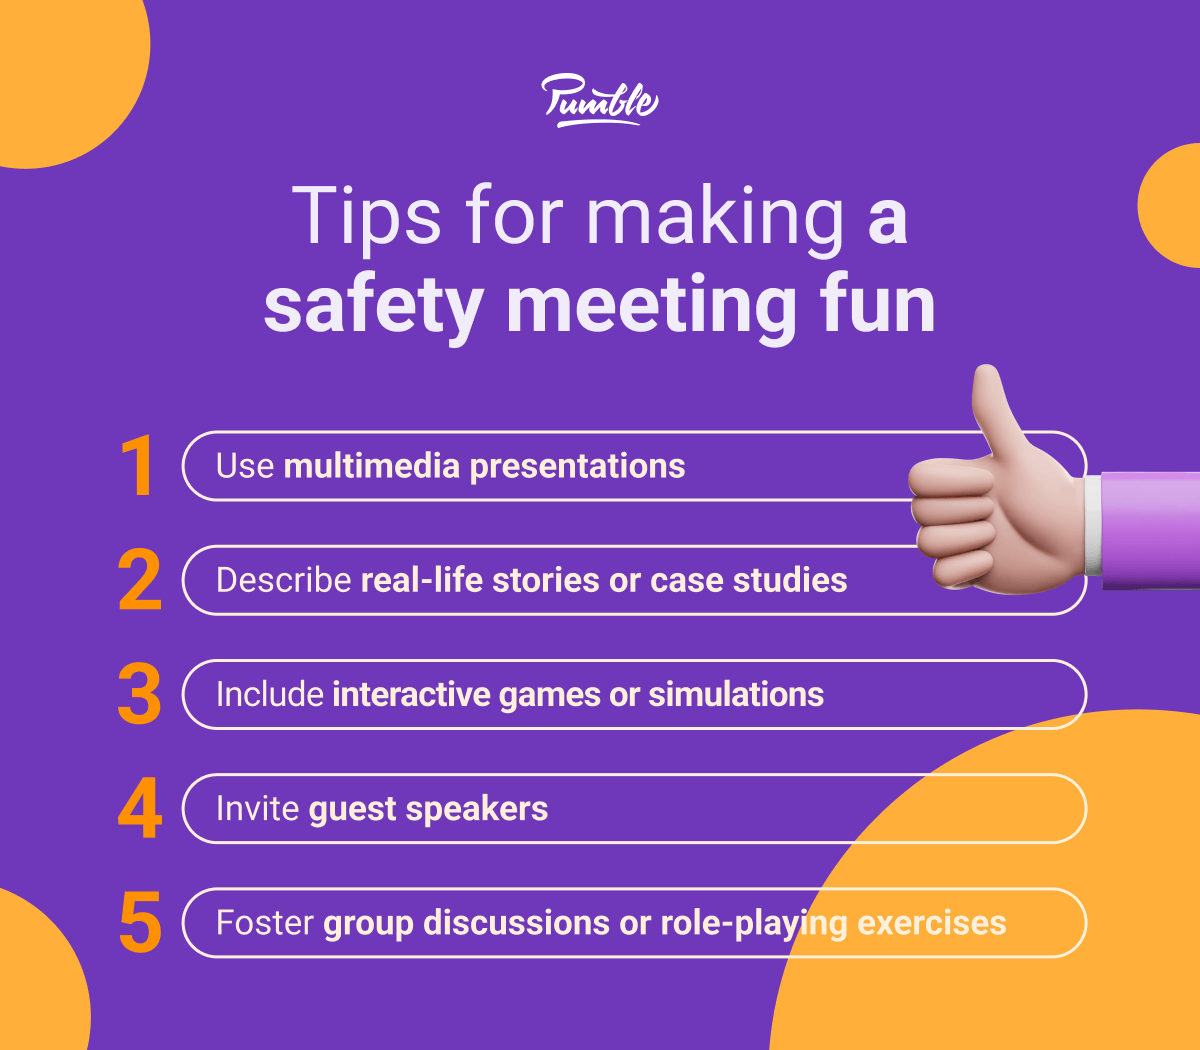 Tips for making a safety meeting fun